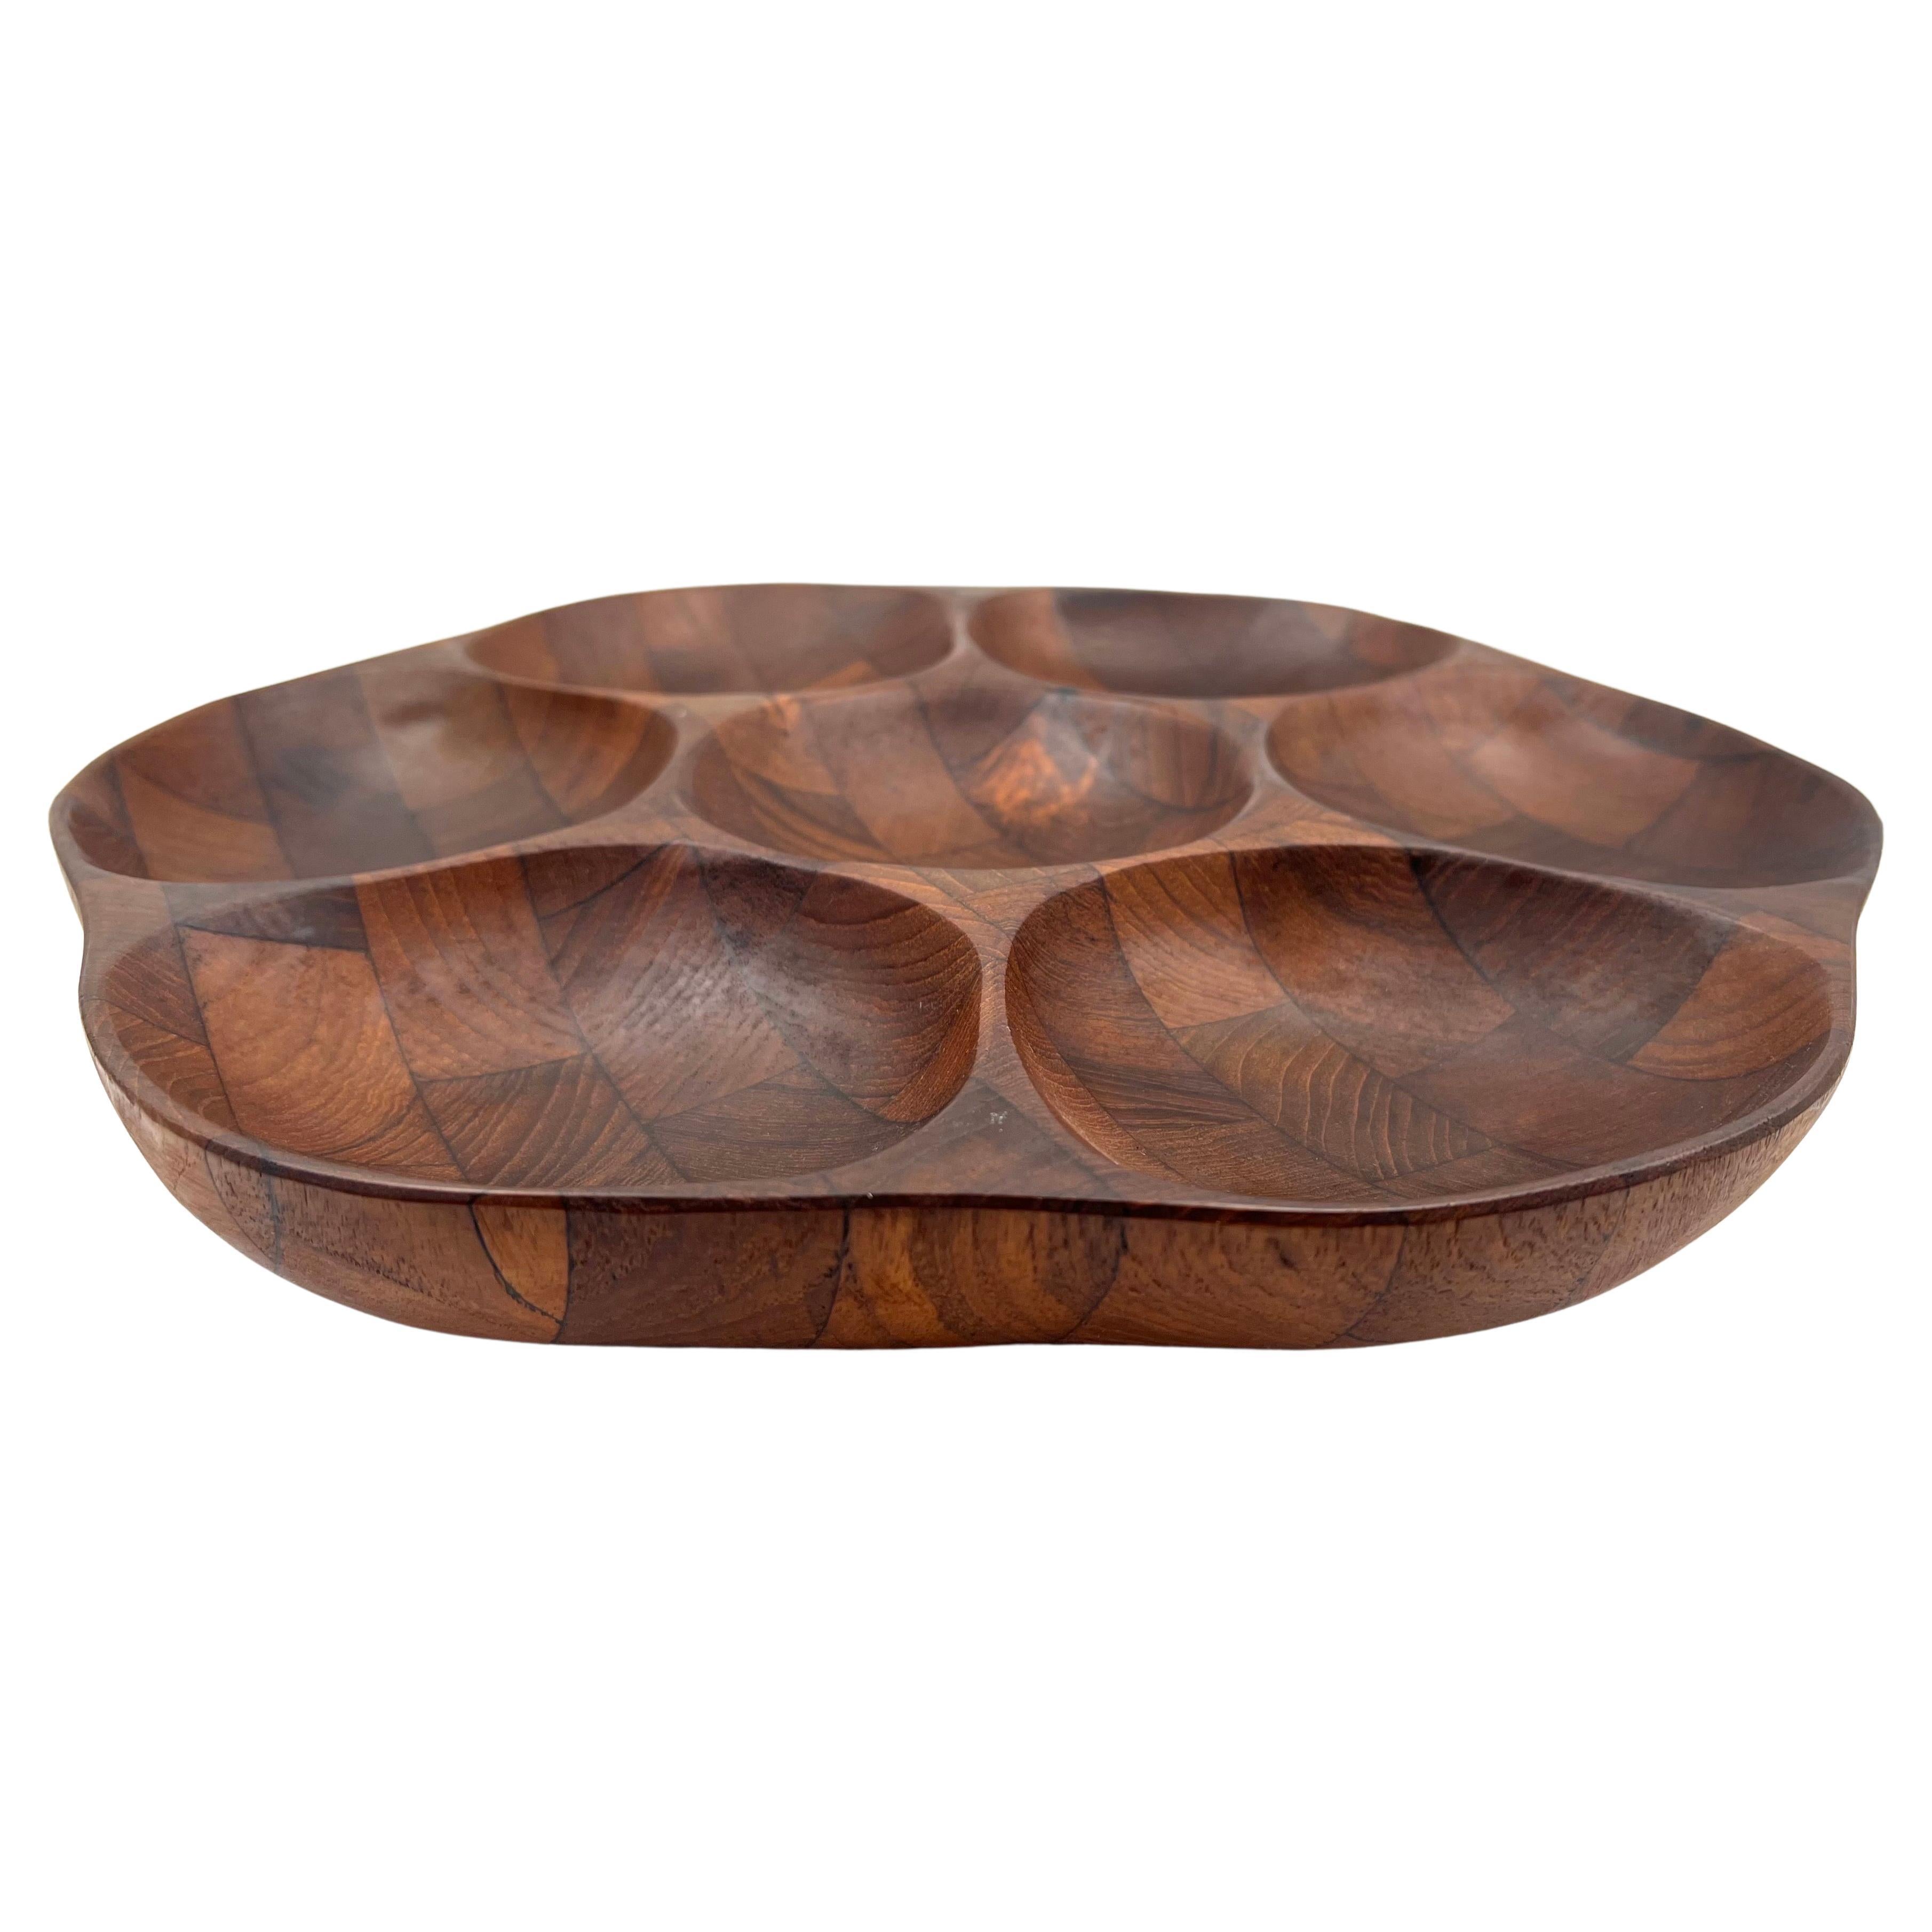 Beautiful solid teak butcherblock lazy susan, great for nuts olives, etc.